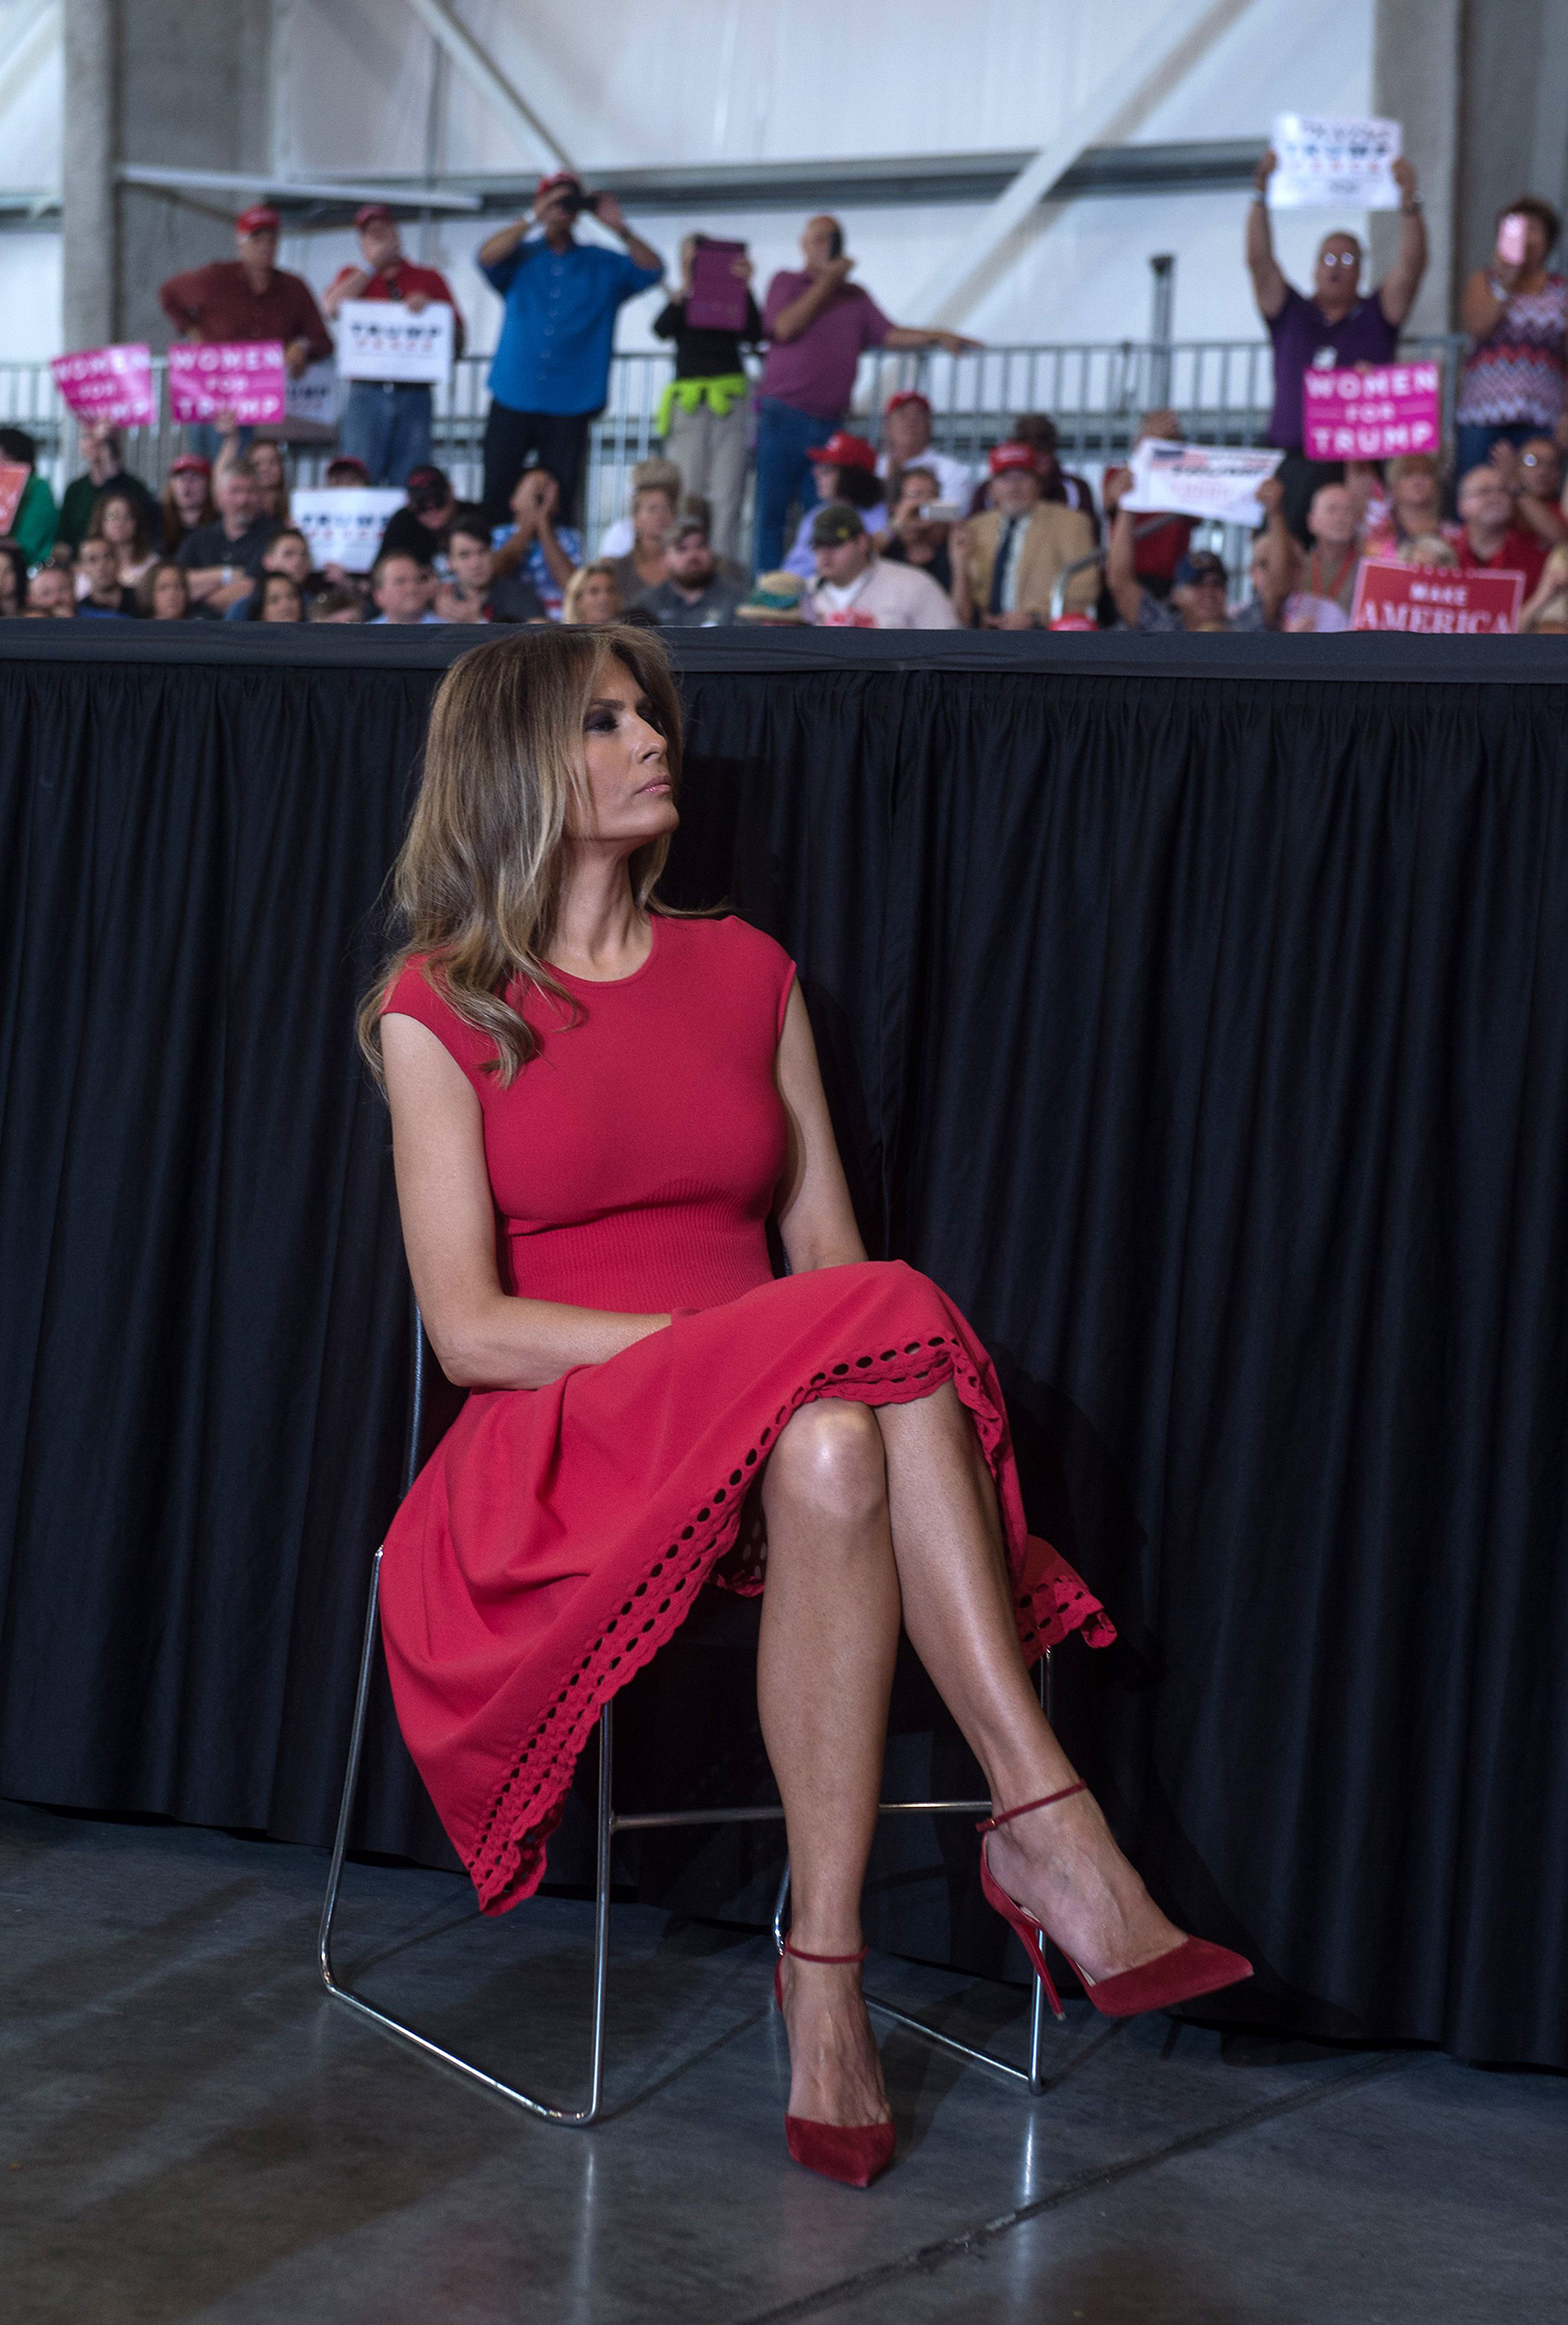 US First Lady Melania Trump wearing an Alexander McQueen red dress, listens as her husband, US President Donald Trump addresses a rally in Melbourne, Fla., on Feb.18, 2017